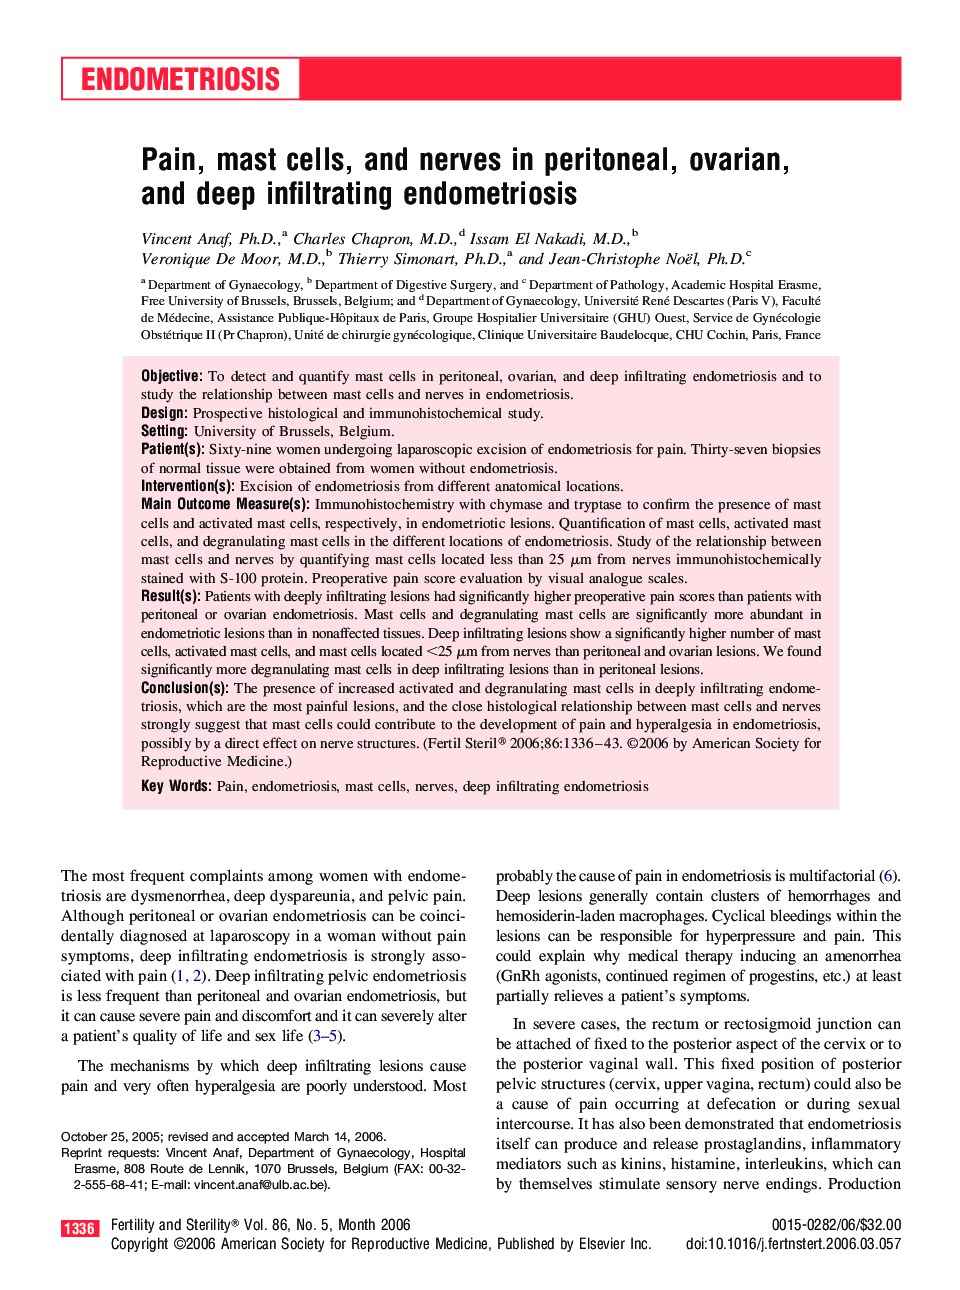 Pain, mast cells, and nerves in peritoneal, ovarian, and deep infiltrating endometriosis